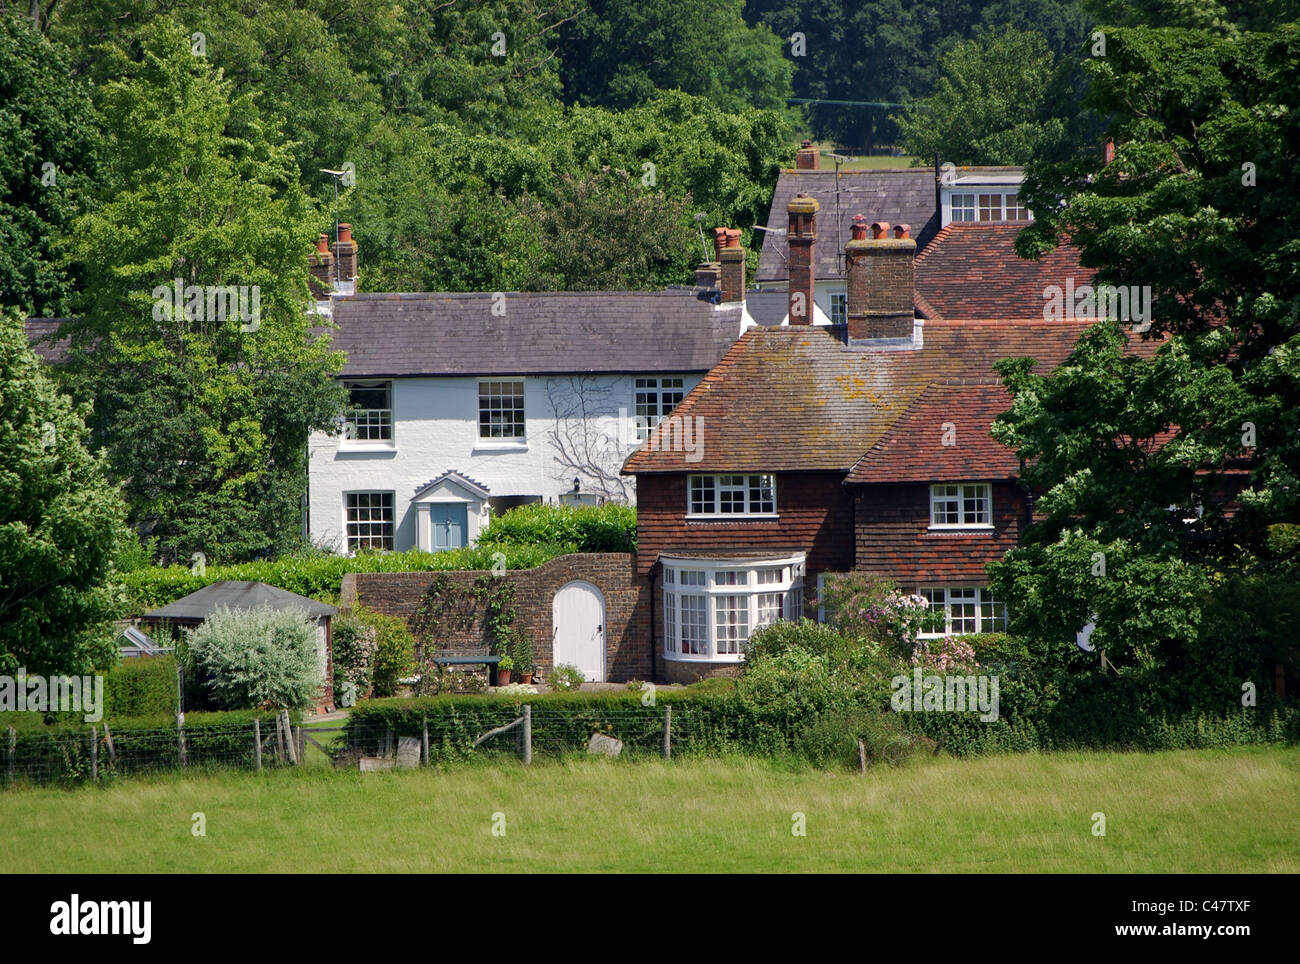 Residential Houses and Cottages within a Rural Countryside Setting, Ditchling, East Sussex, England, UK Stock Photo